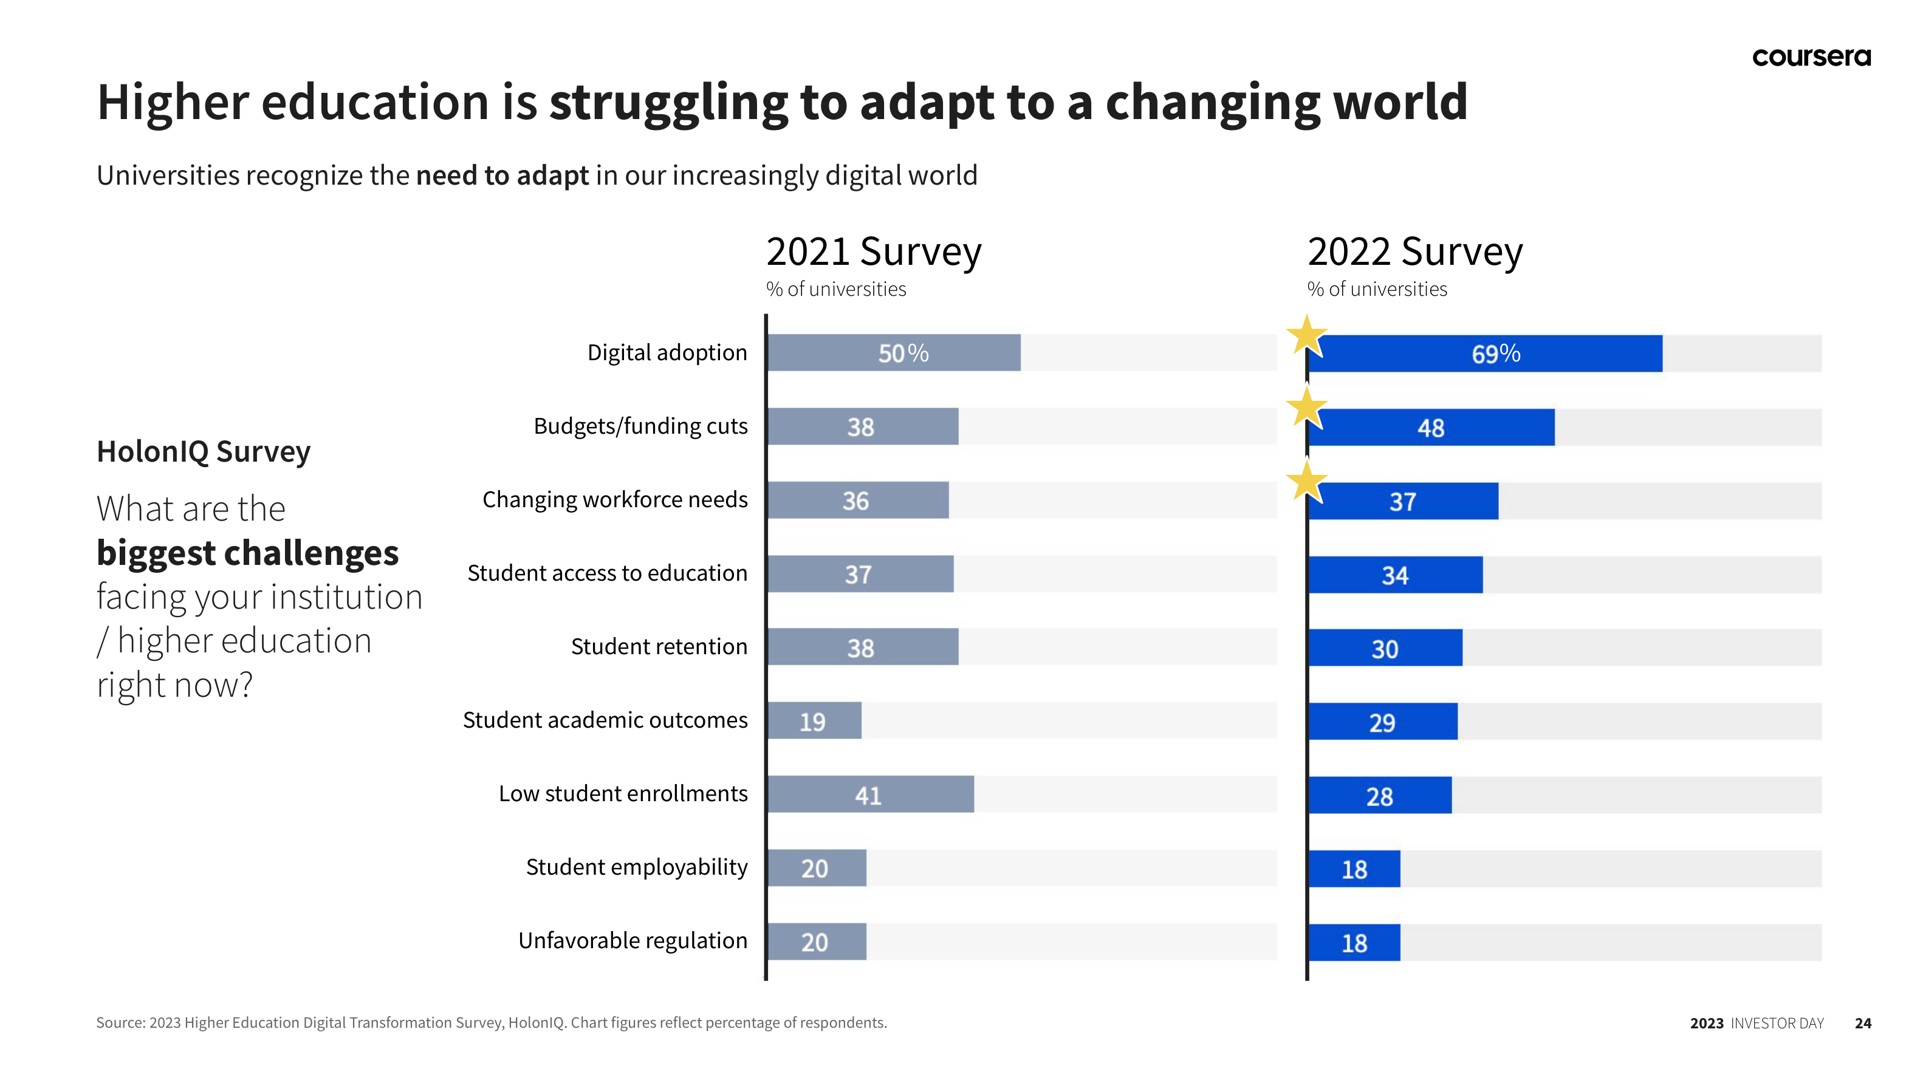 higher education is struggling to adapt to a changing world survey survey | Coursera